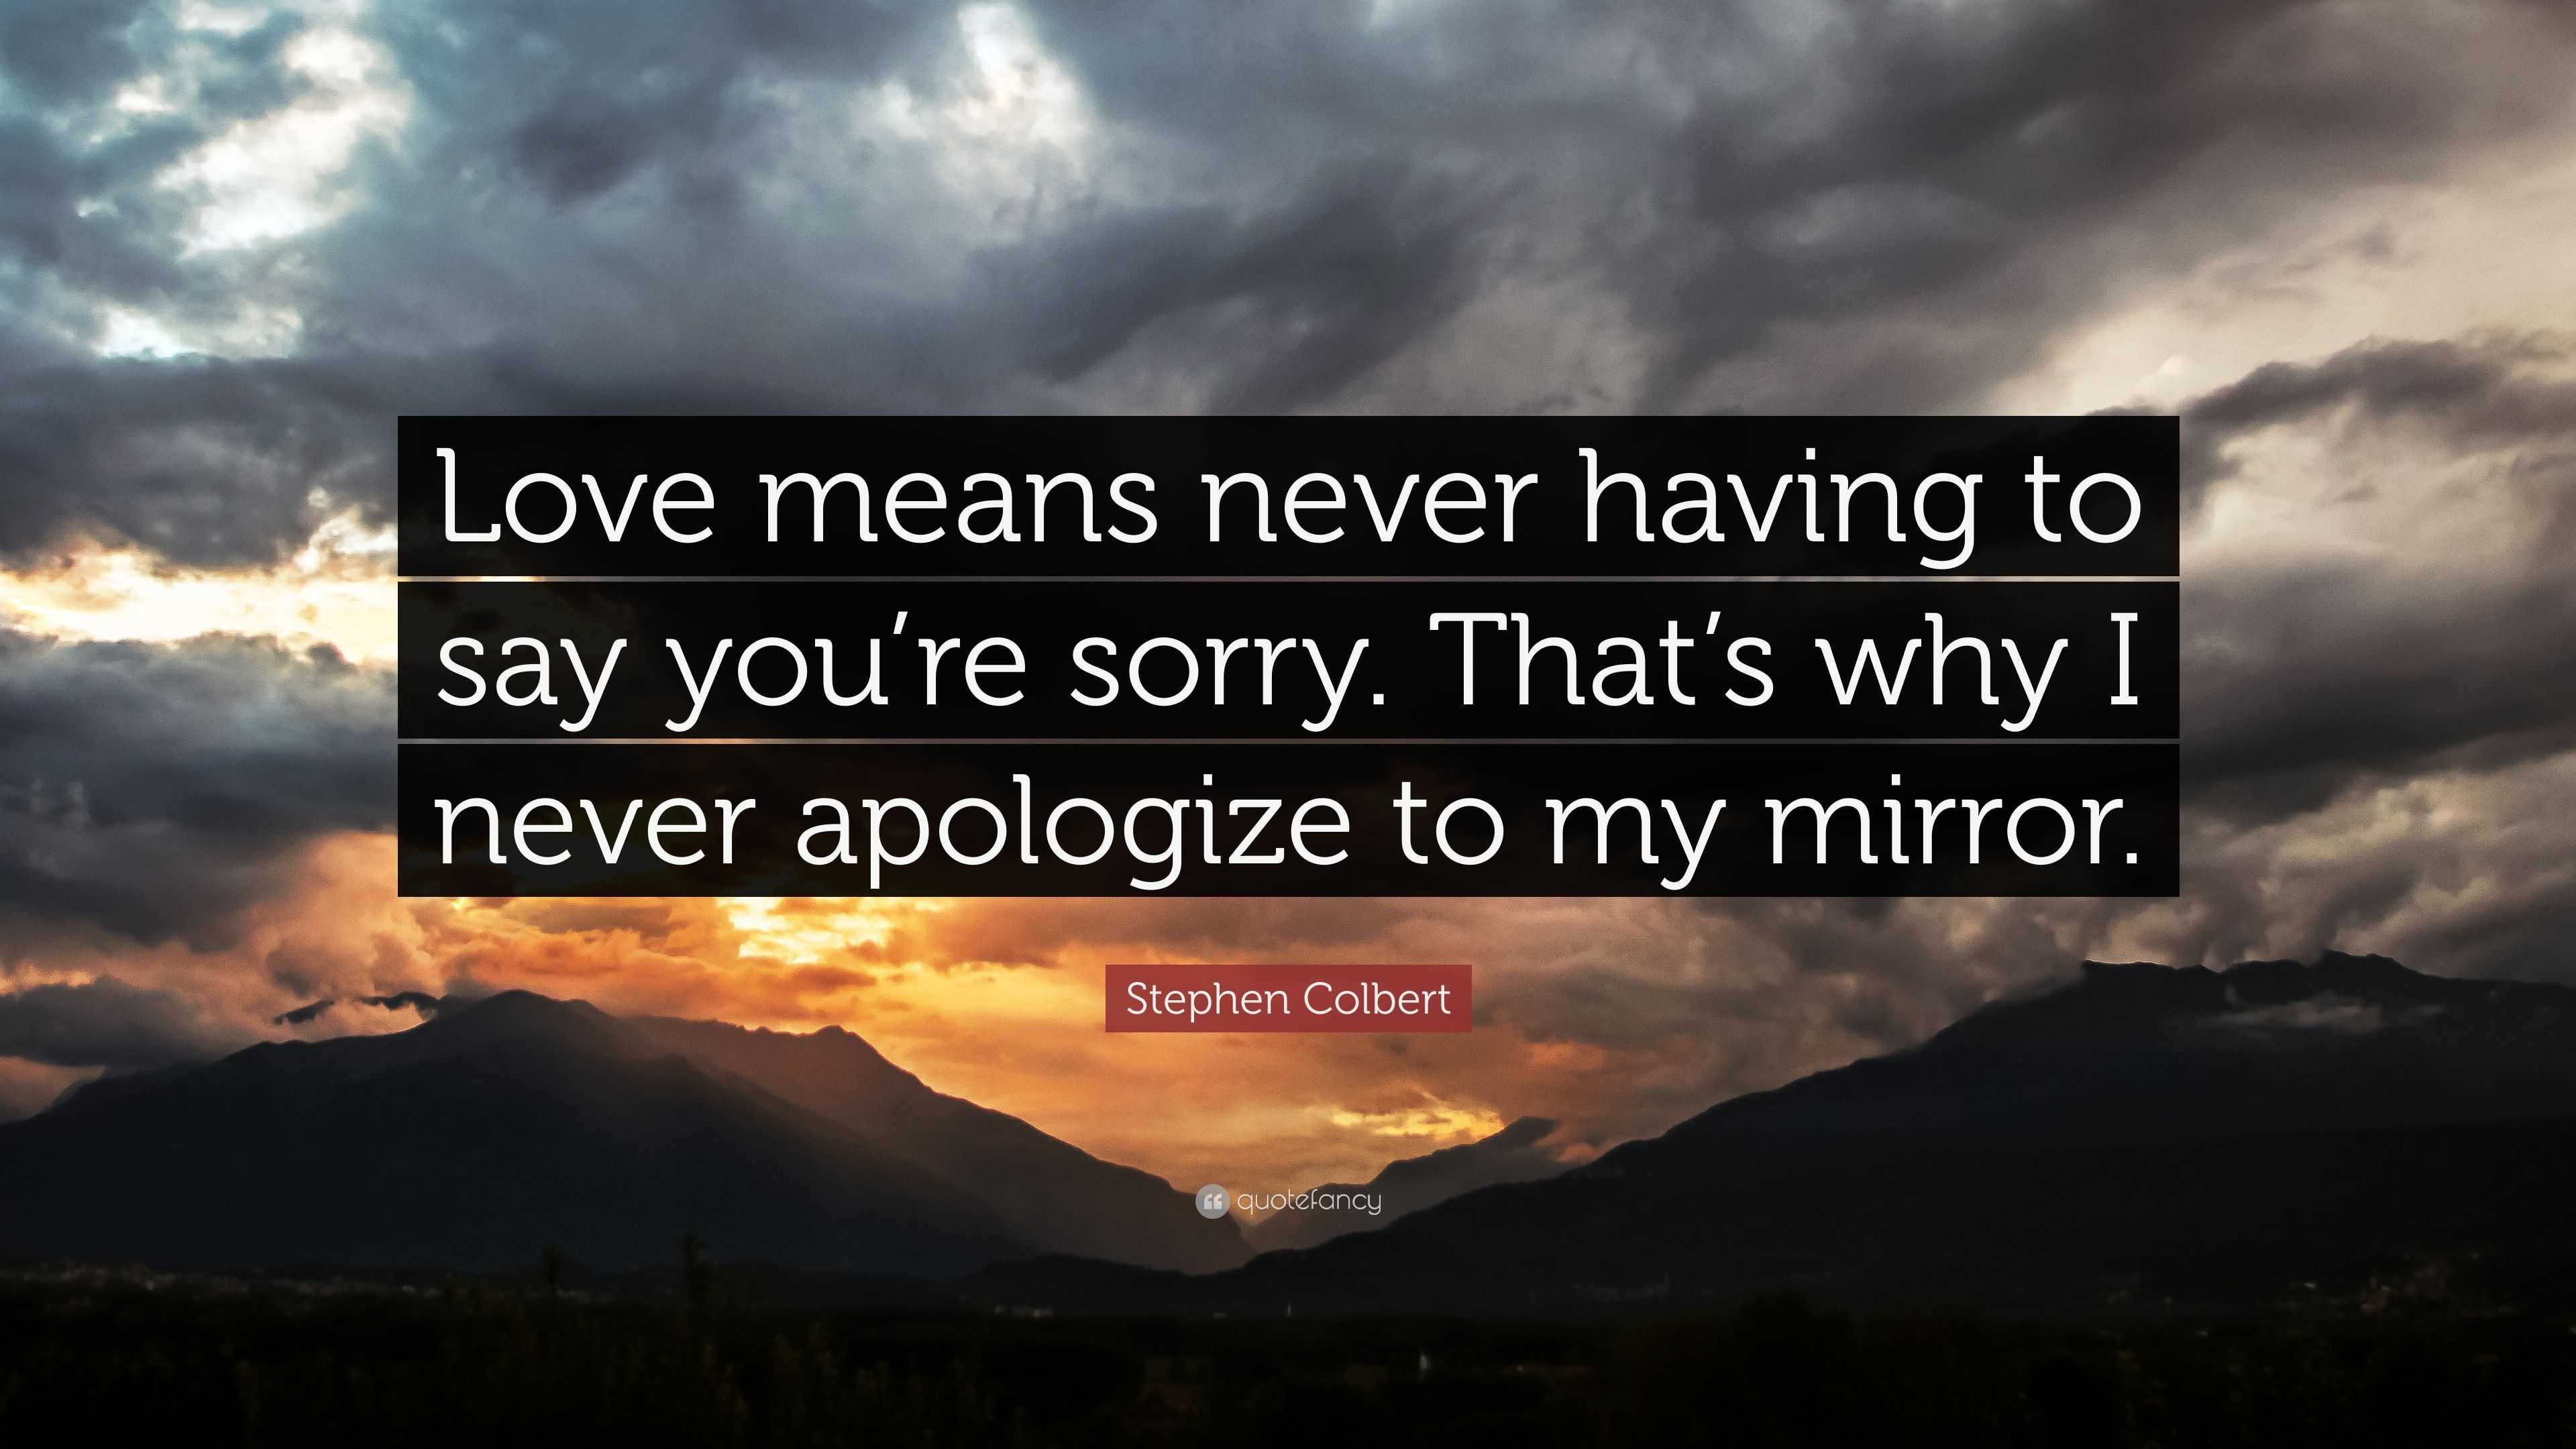 Stephen Colbert Quote “Love means never having to say you re sorry